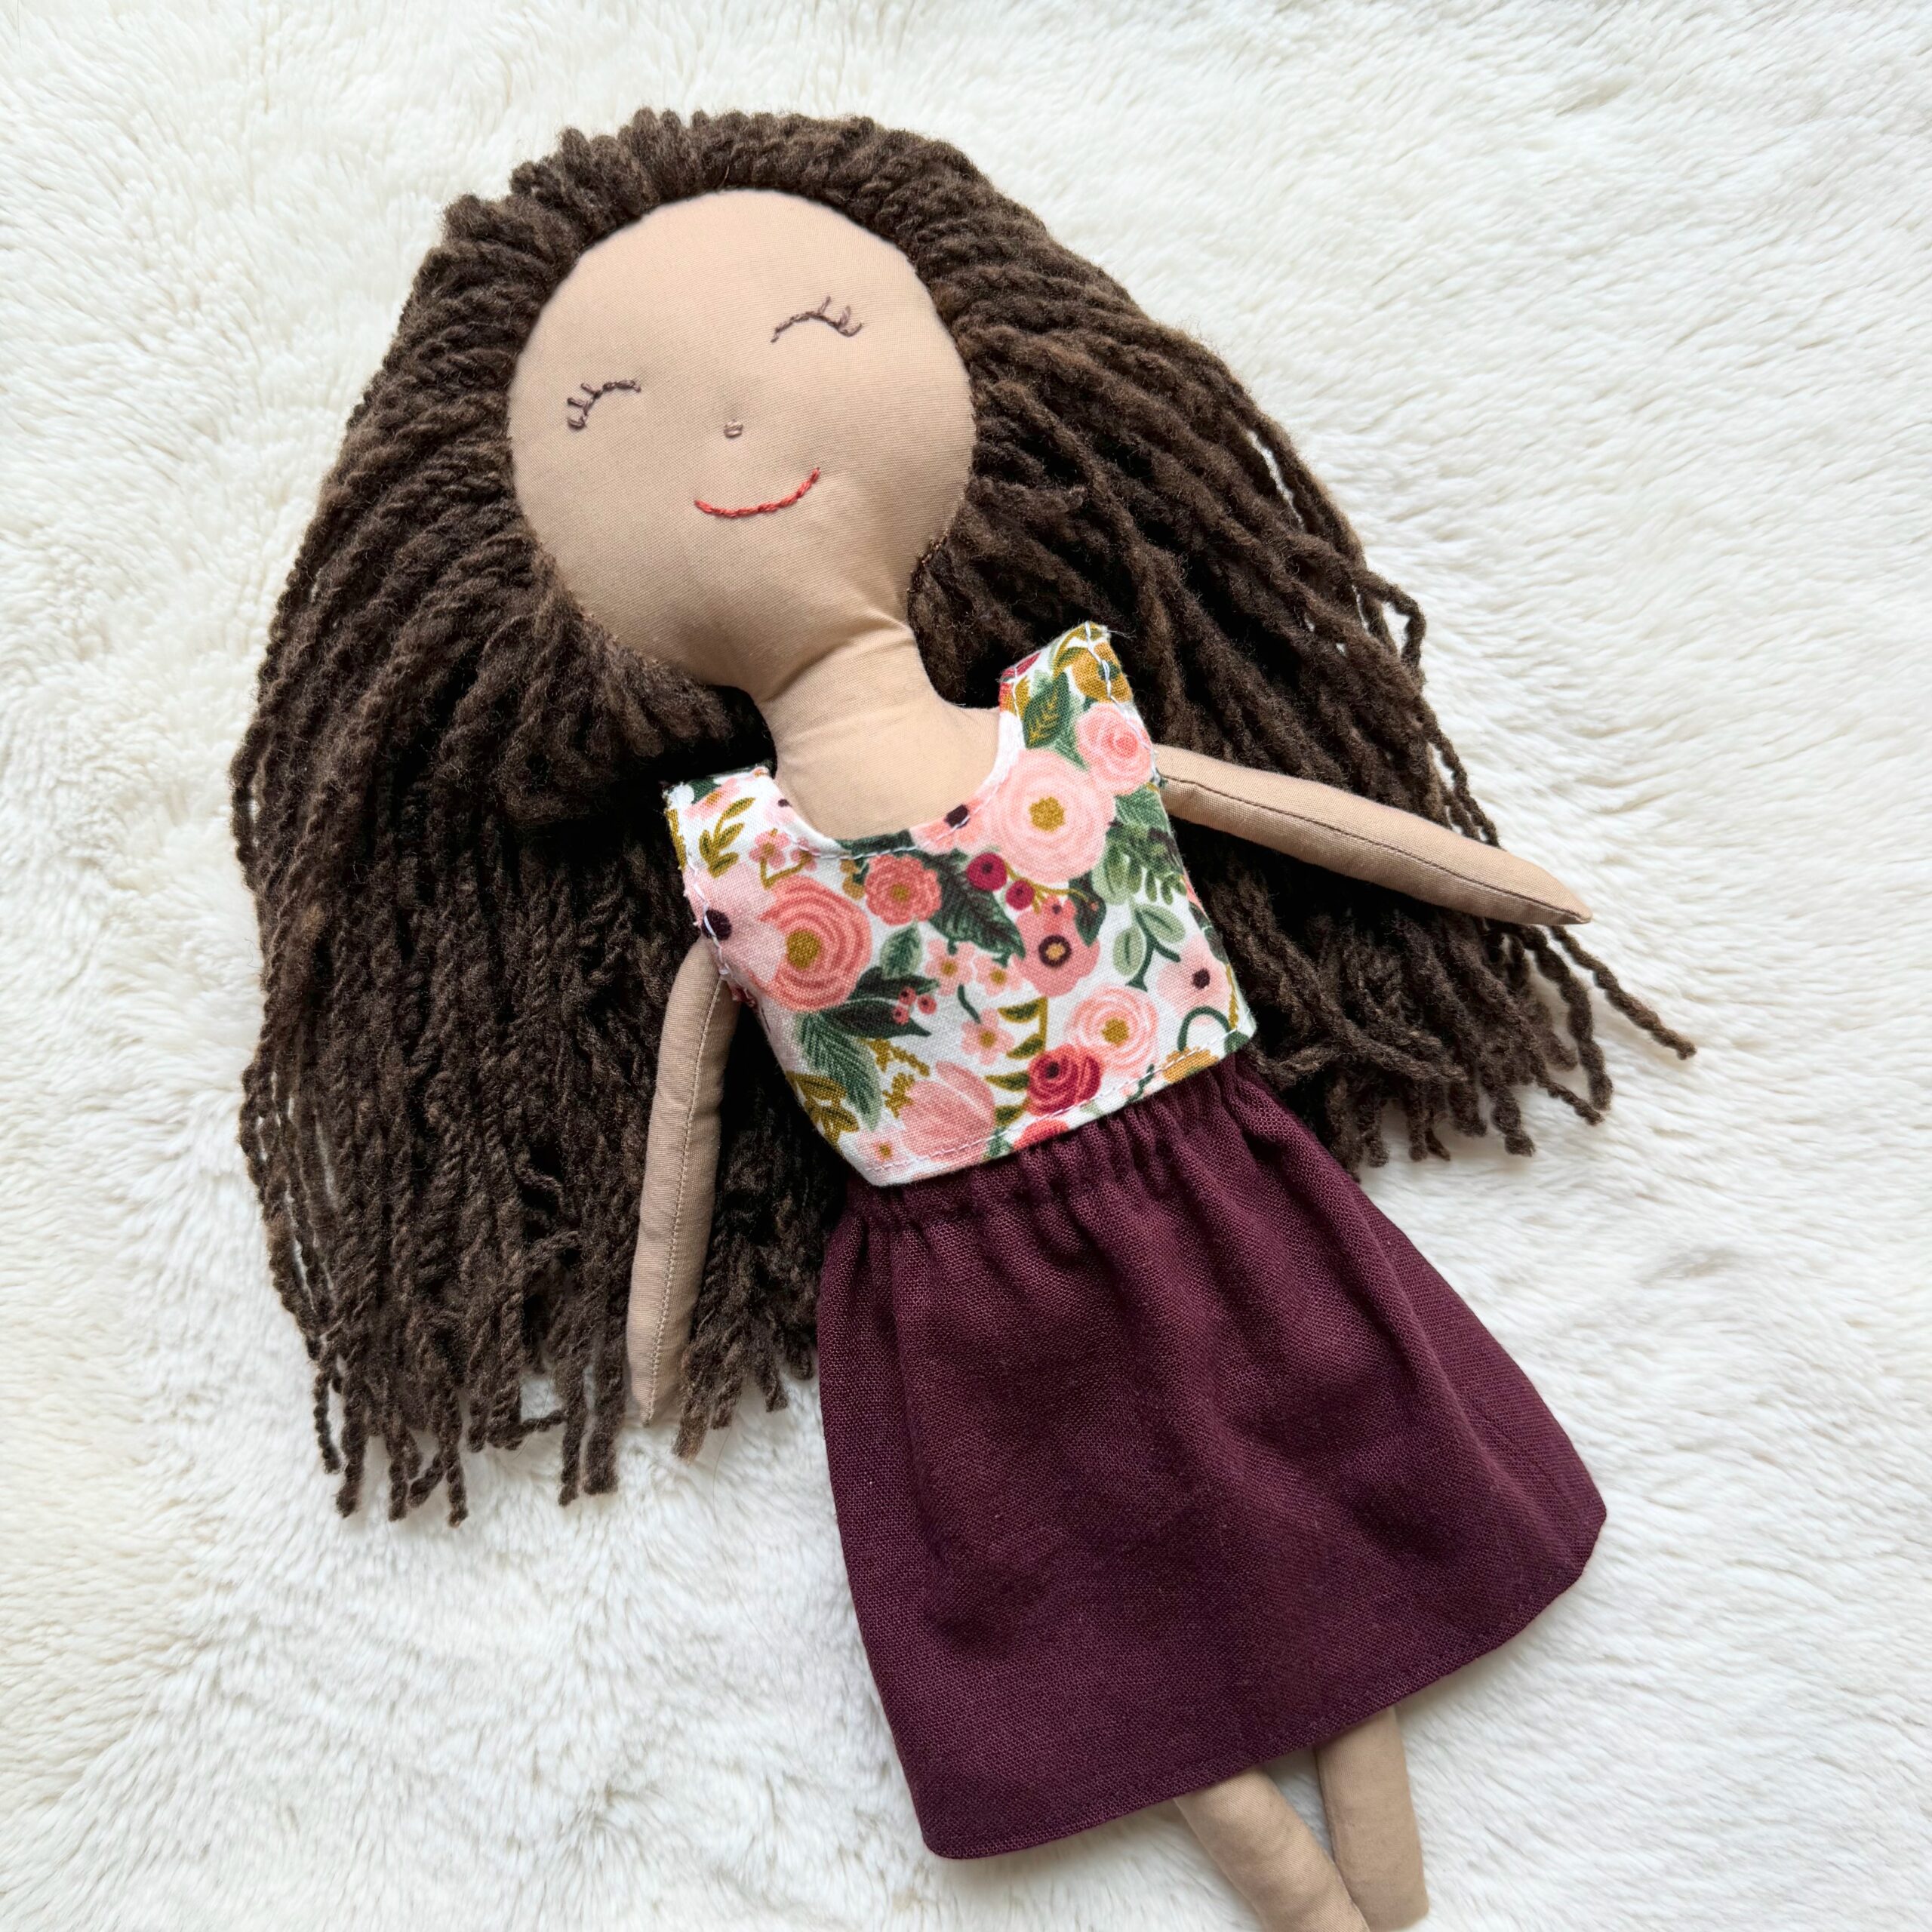 A Step-by-Step Guide to Sew a Rag Doll – Free Pattern!